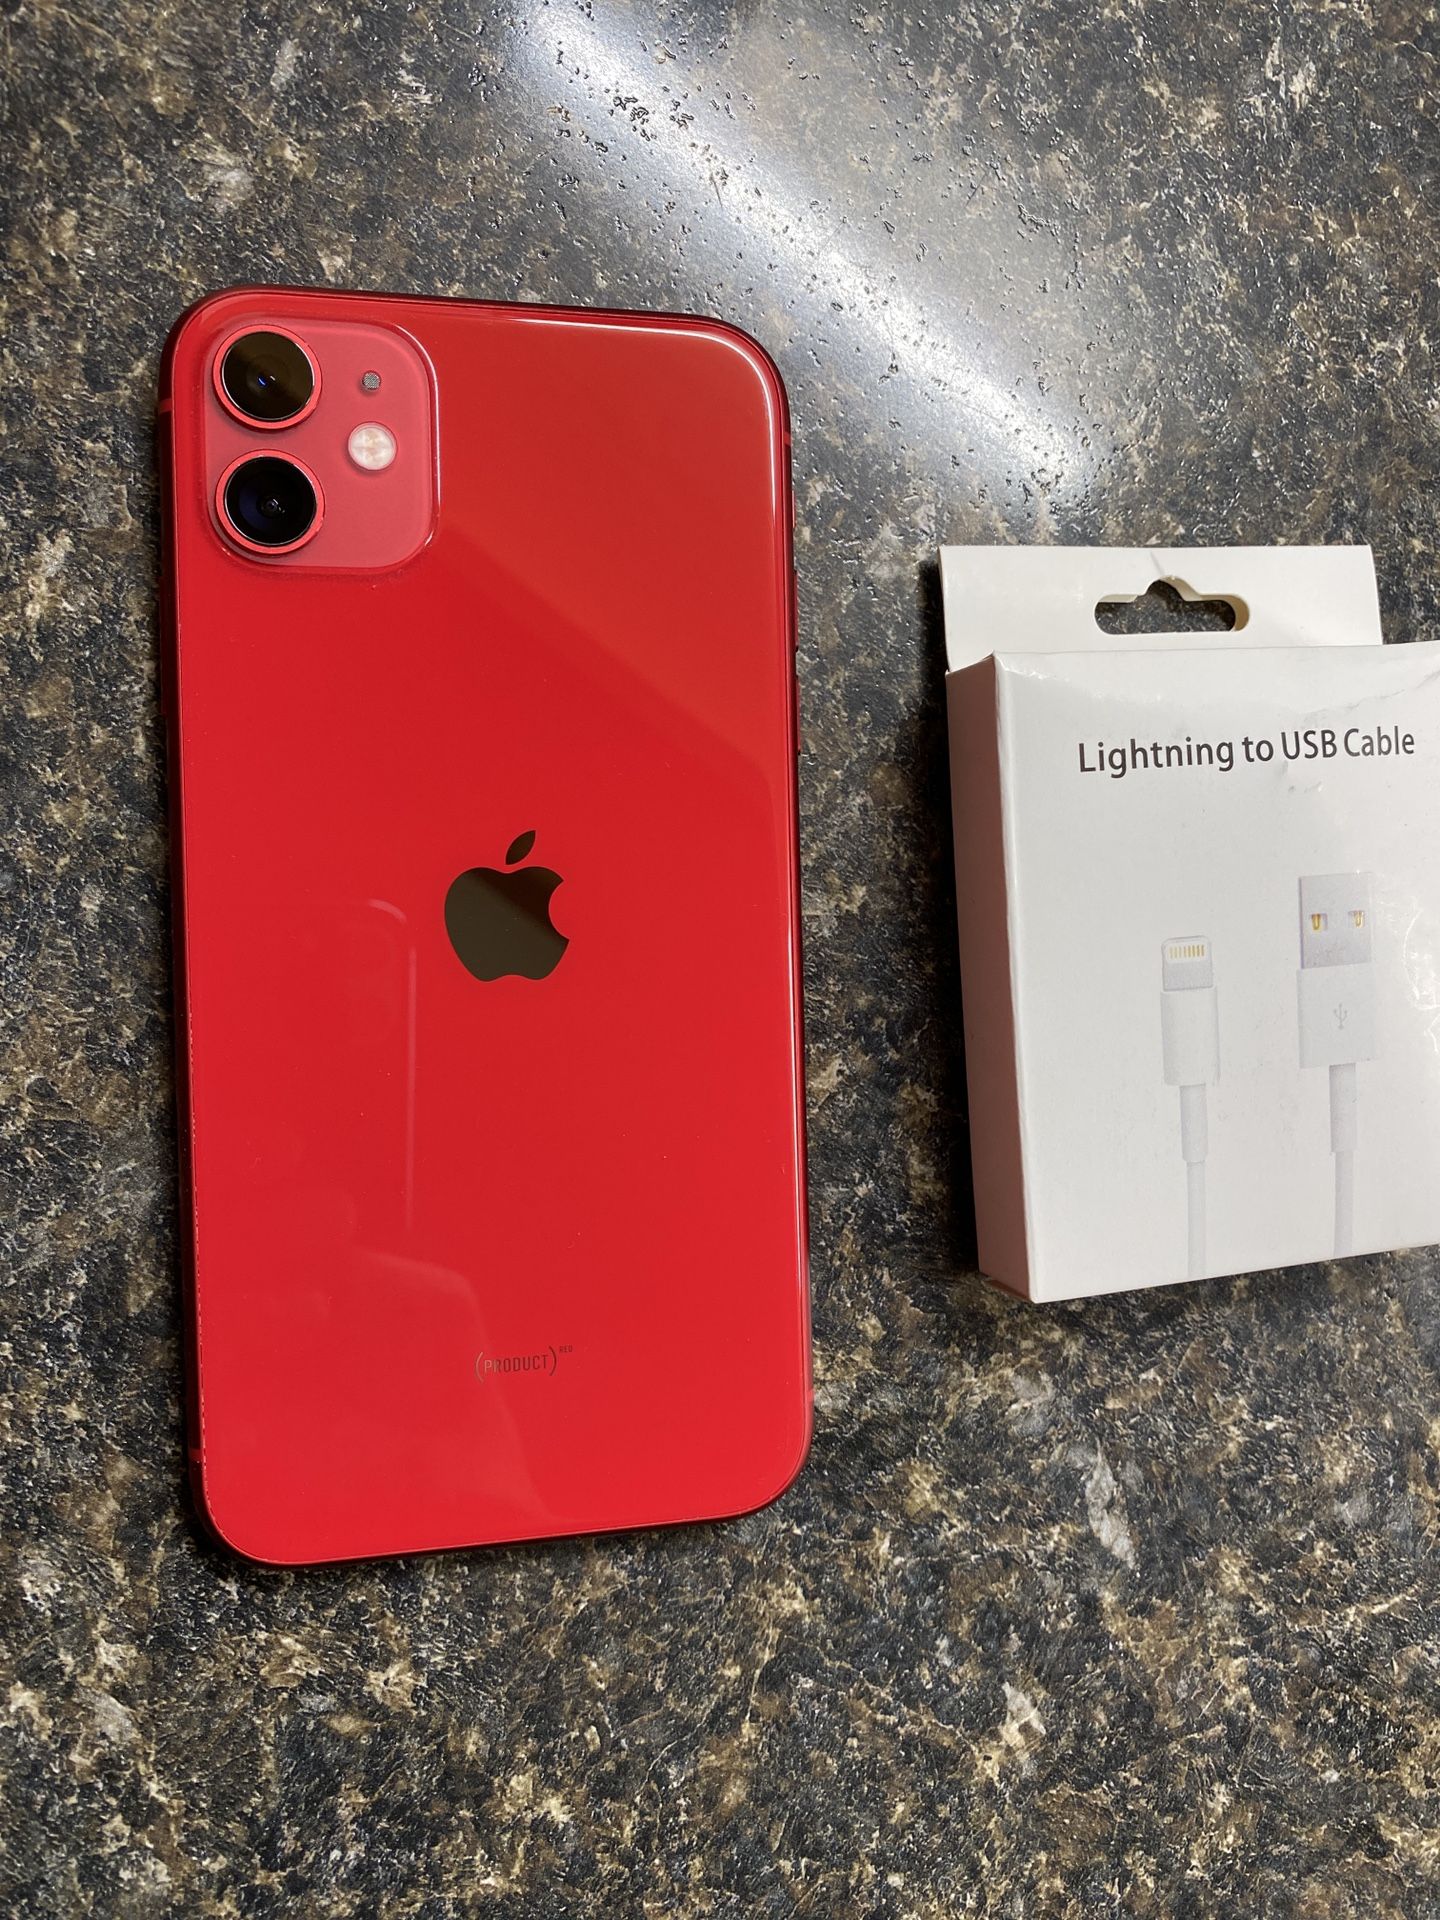 iPhone 11 64GB Product Red Unlocked✅Price firm✅